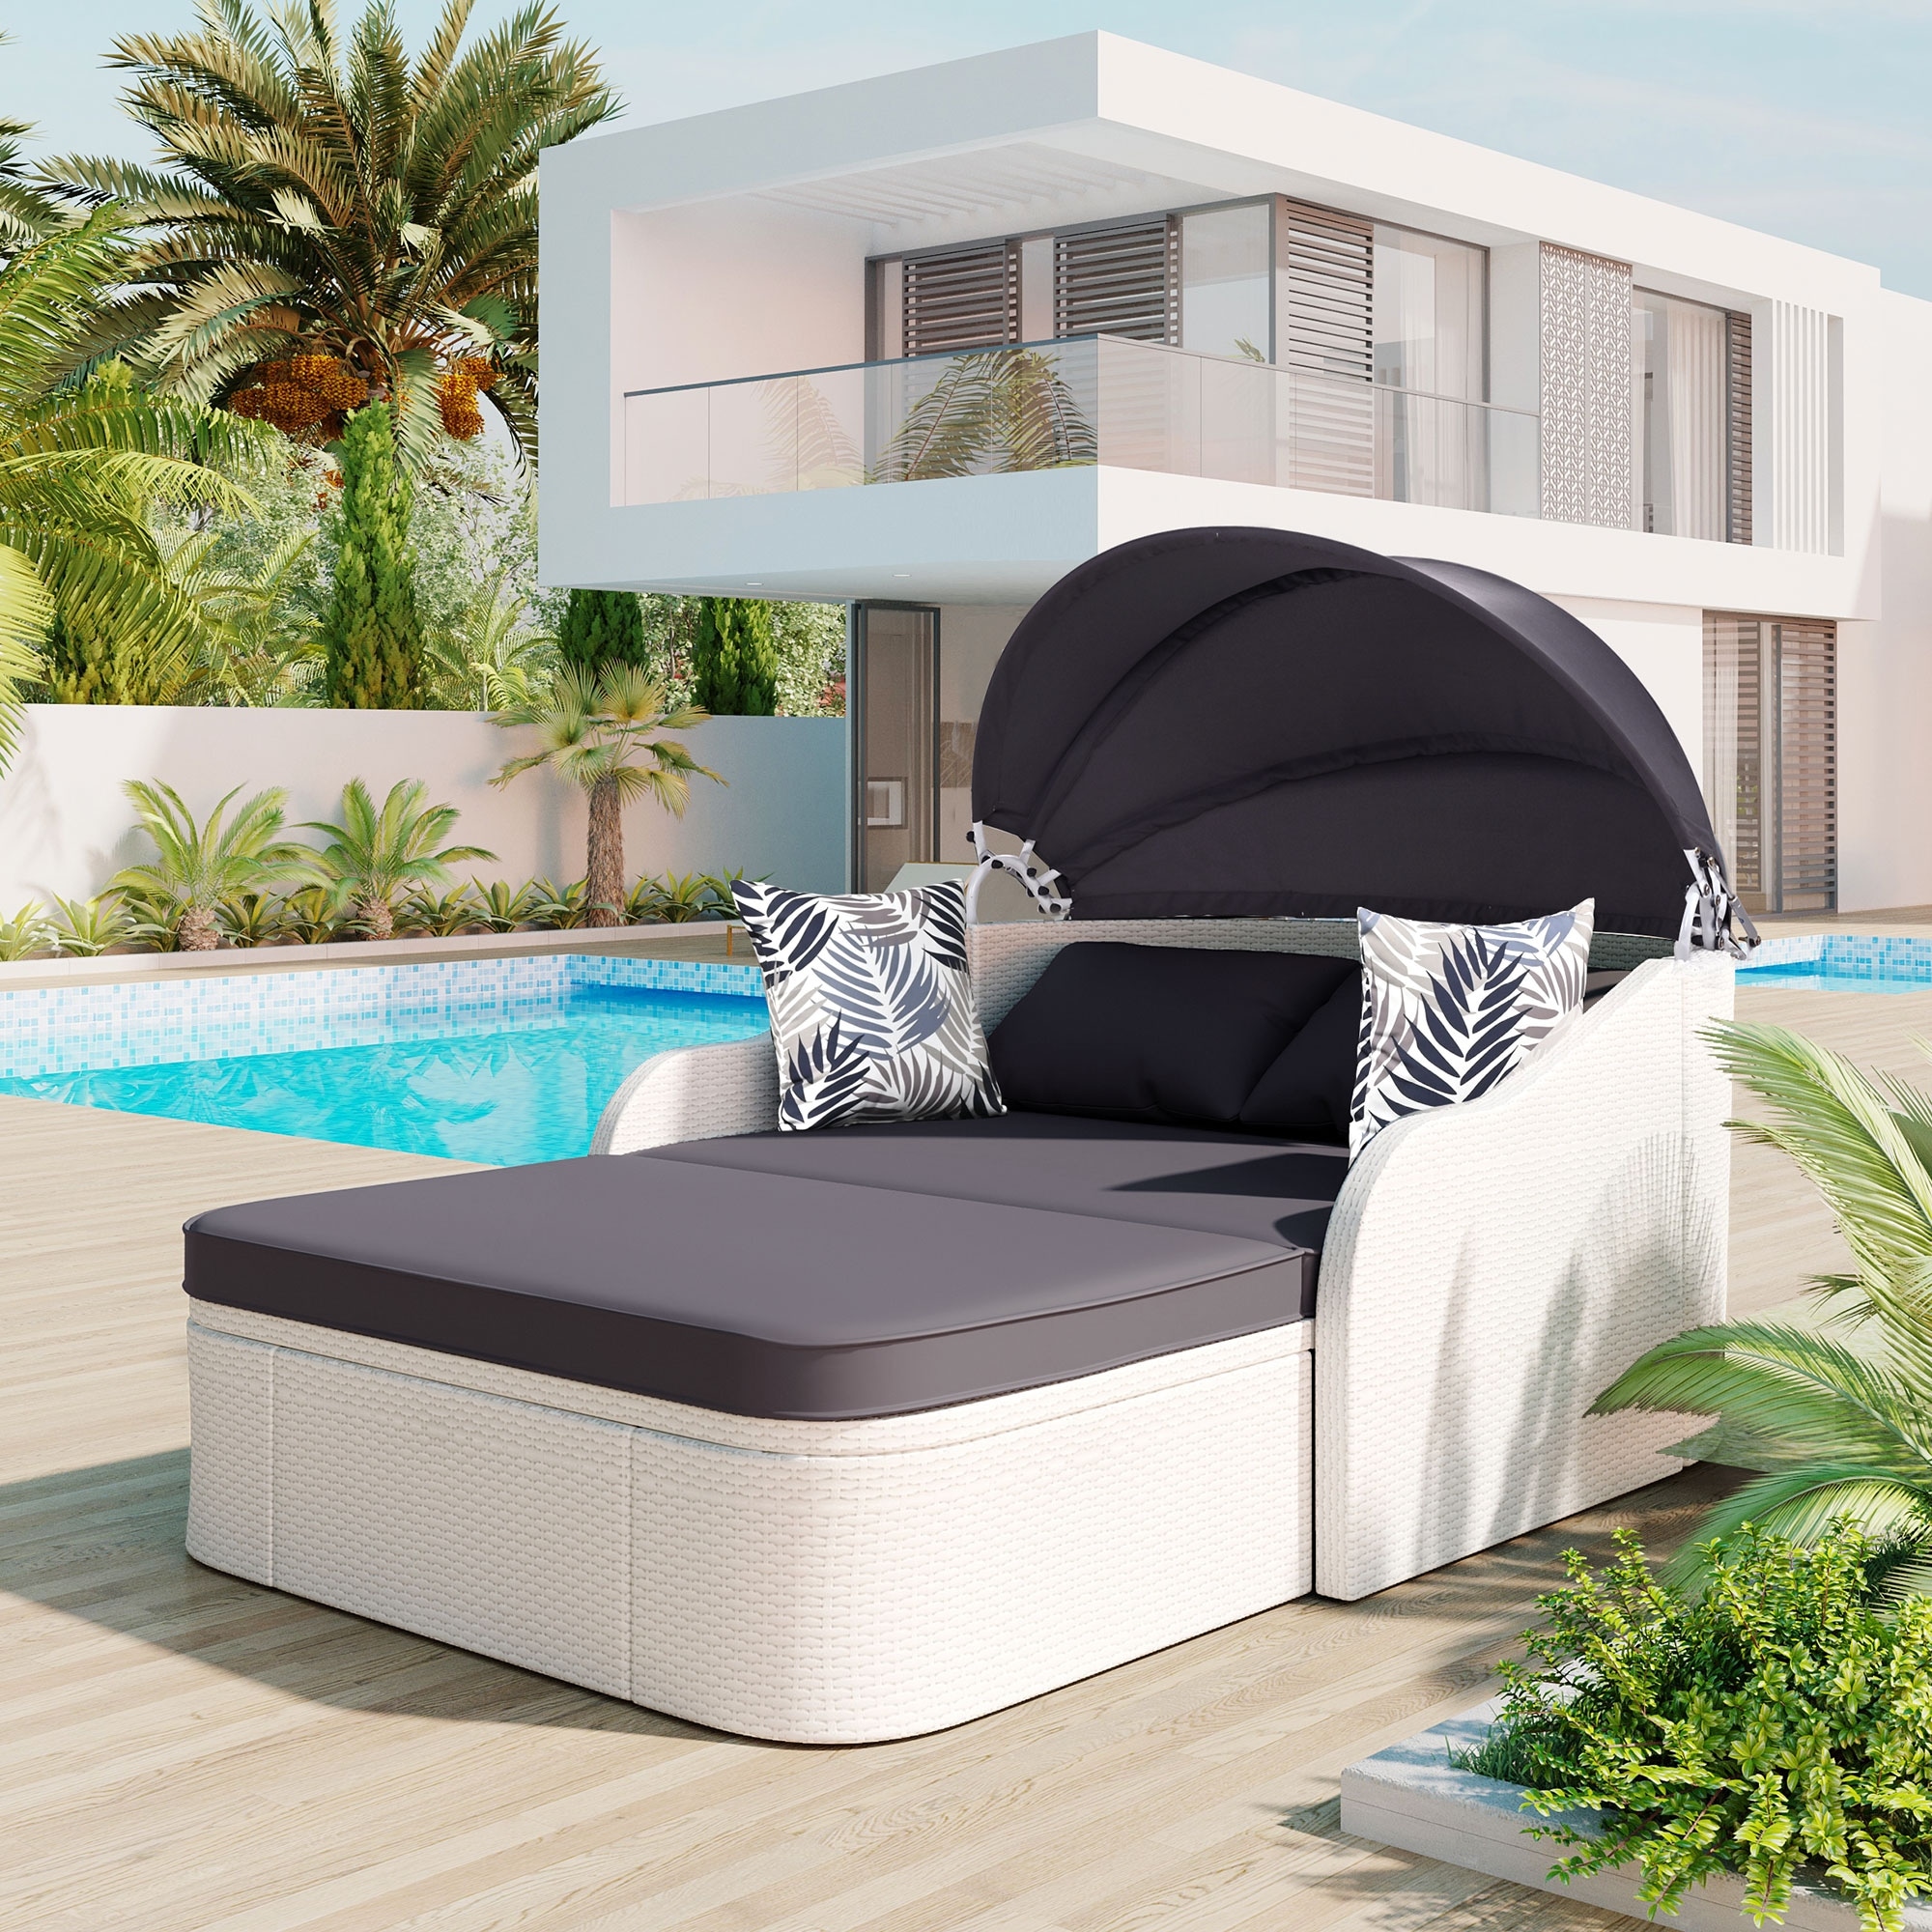 79.9 Outdoor Sunbed With Adjustable Canopy  Double Lounge  Pe Rattan Daybed